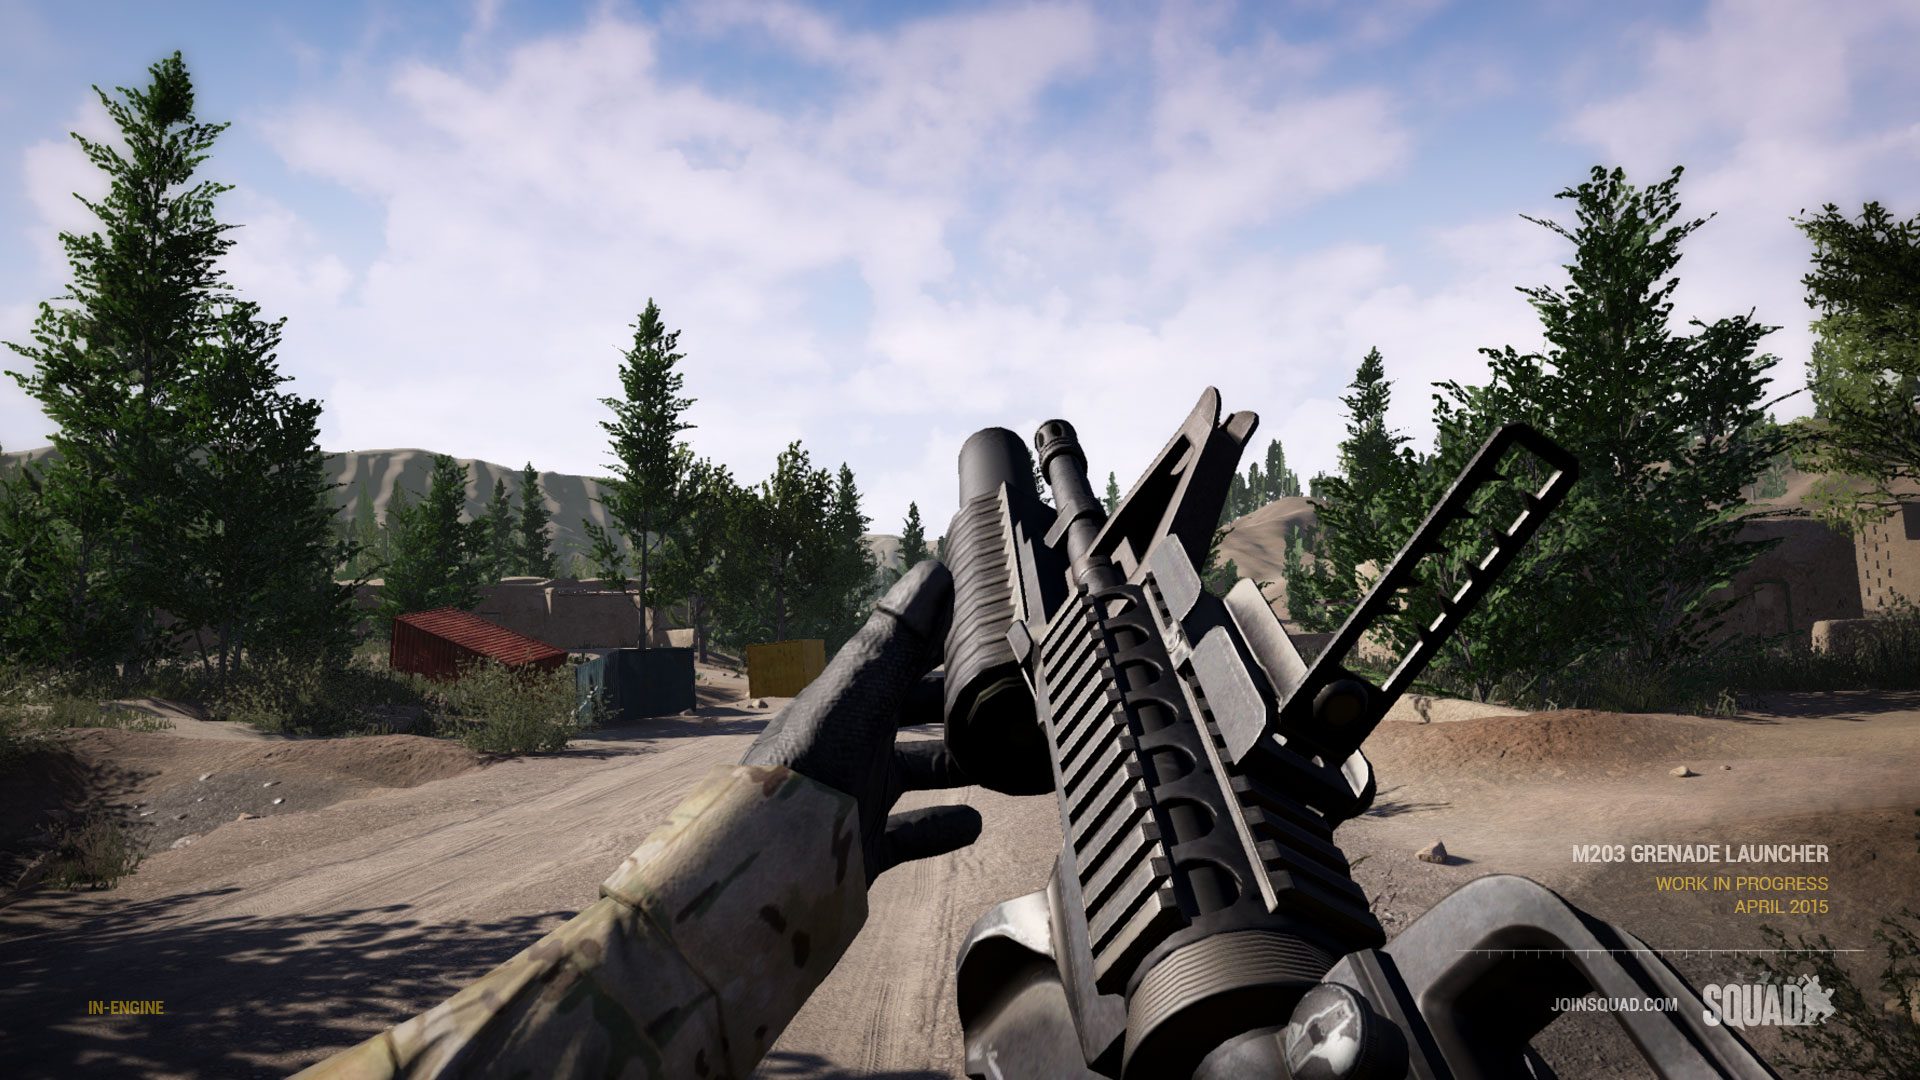 Squad will be released in Steam Early Access in mid-December